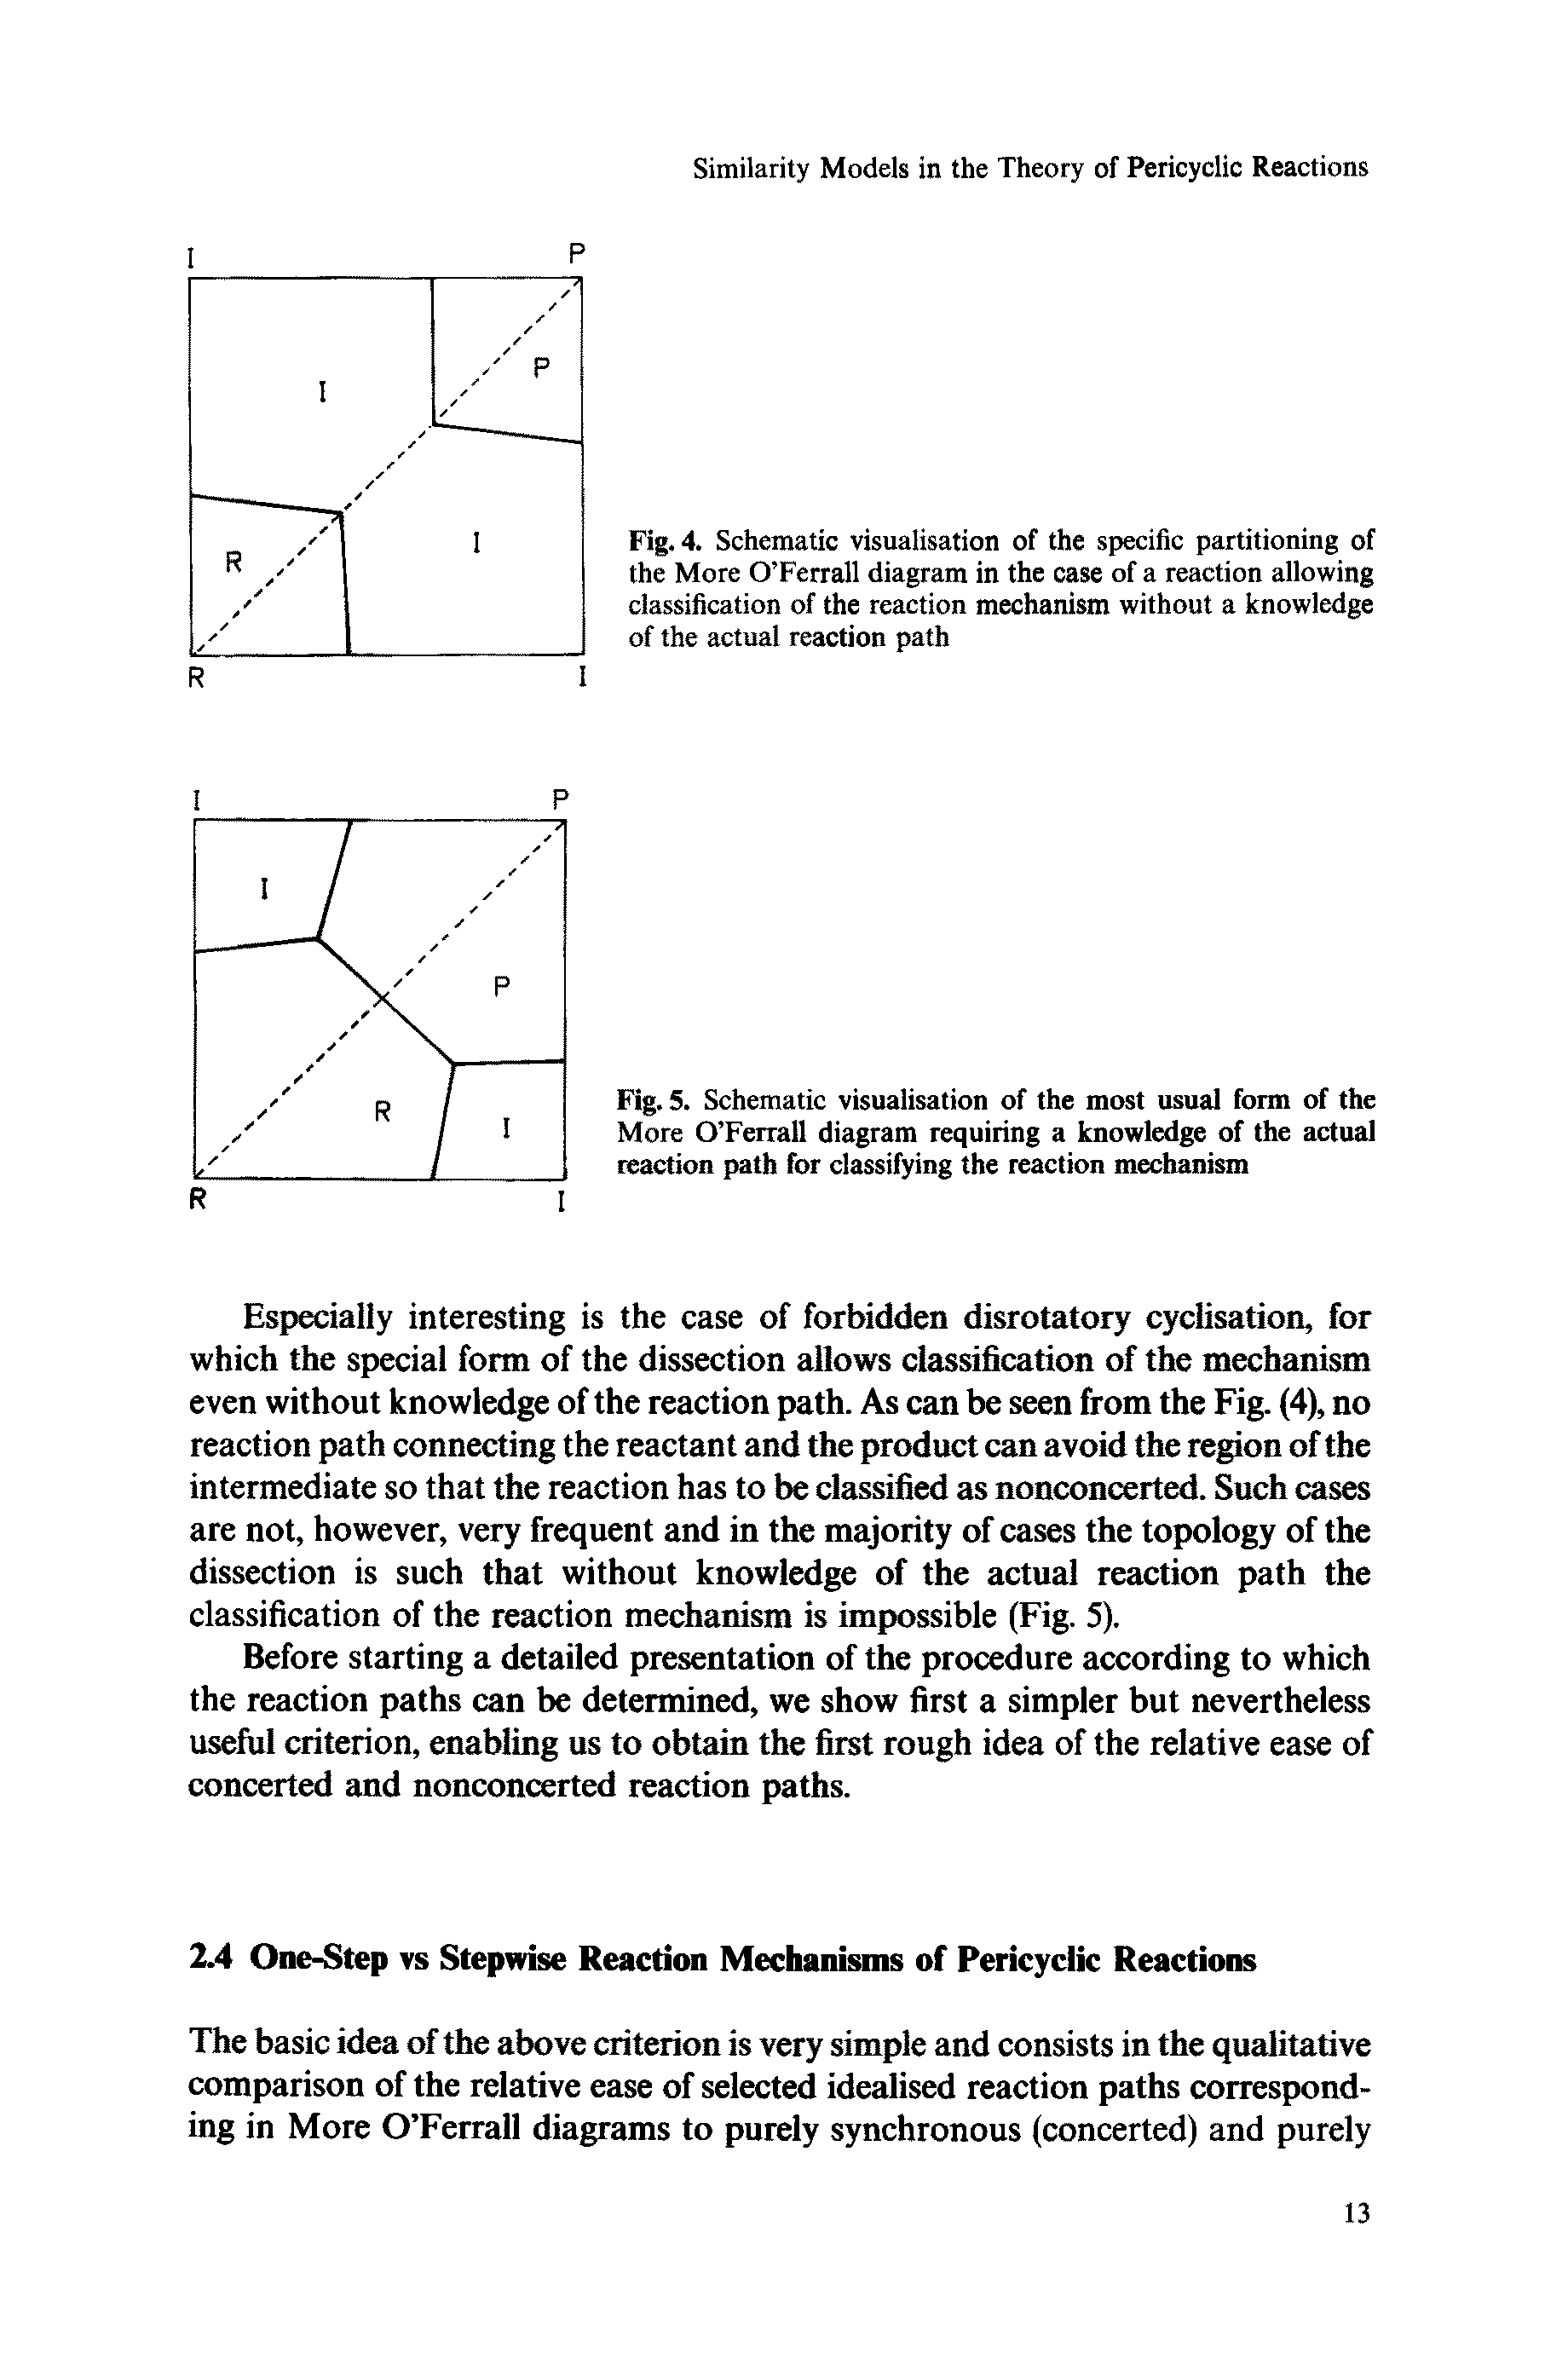 Fig. 4. Schematic visualisation of the specific partitioning of the More O Ferrall diagram in the case of a reaction allowing classification of the reaction mechanism without a knowledge of the actual reaction path...